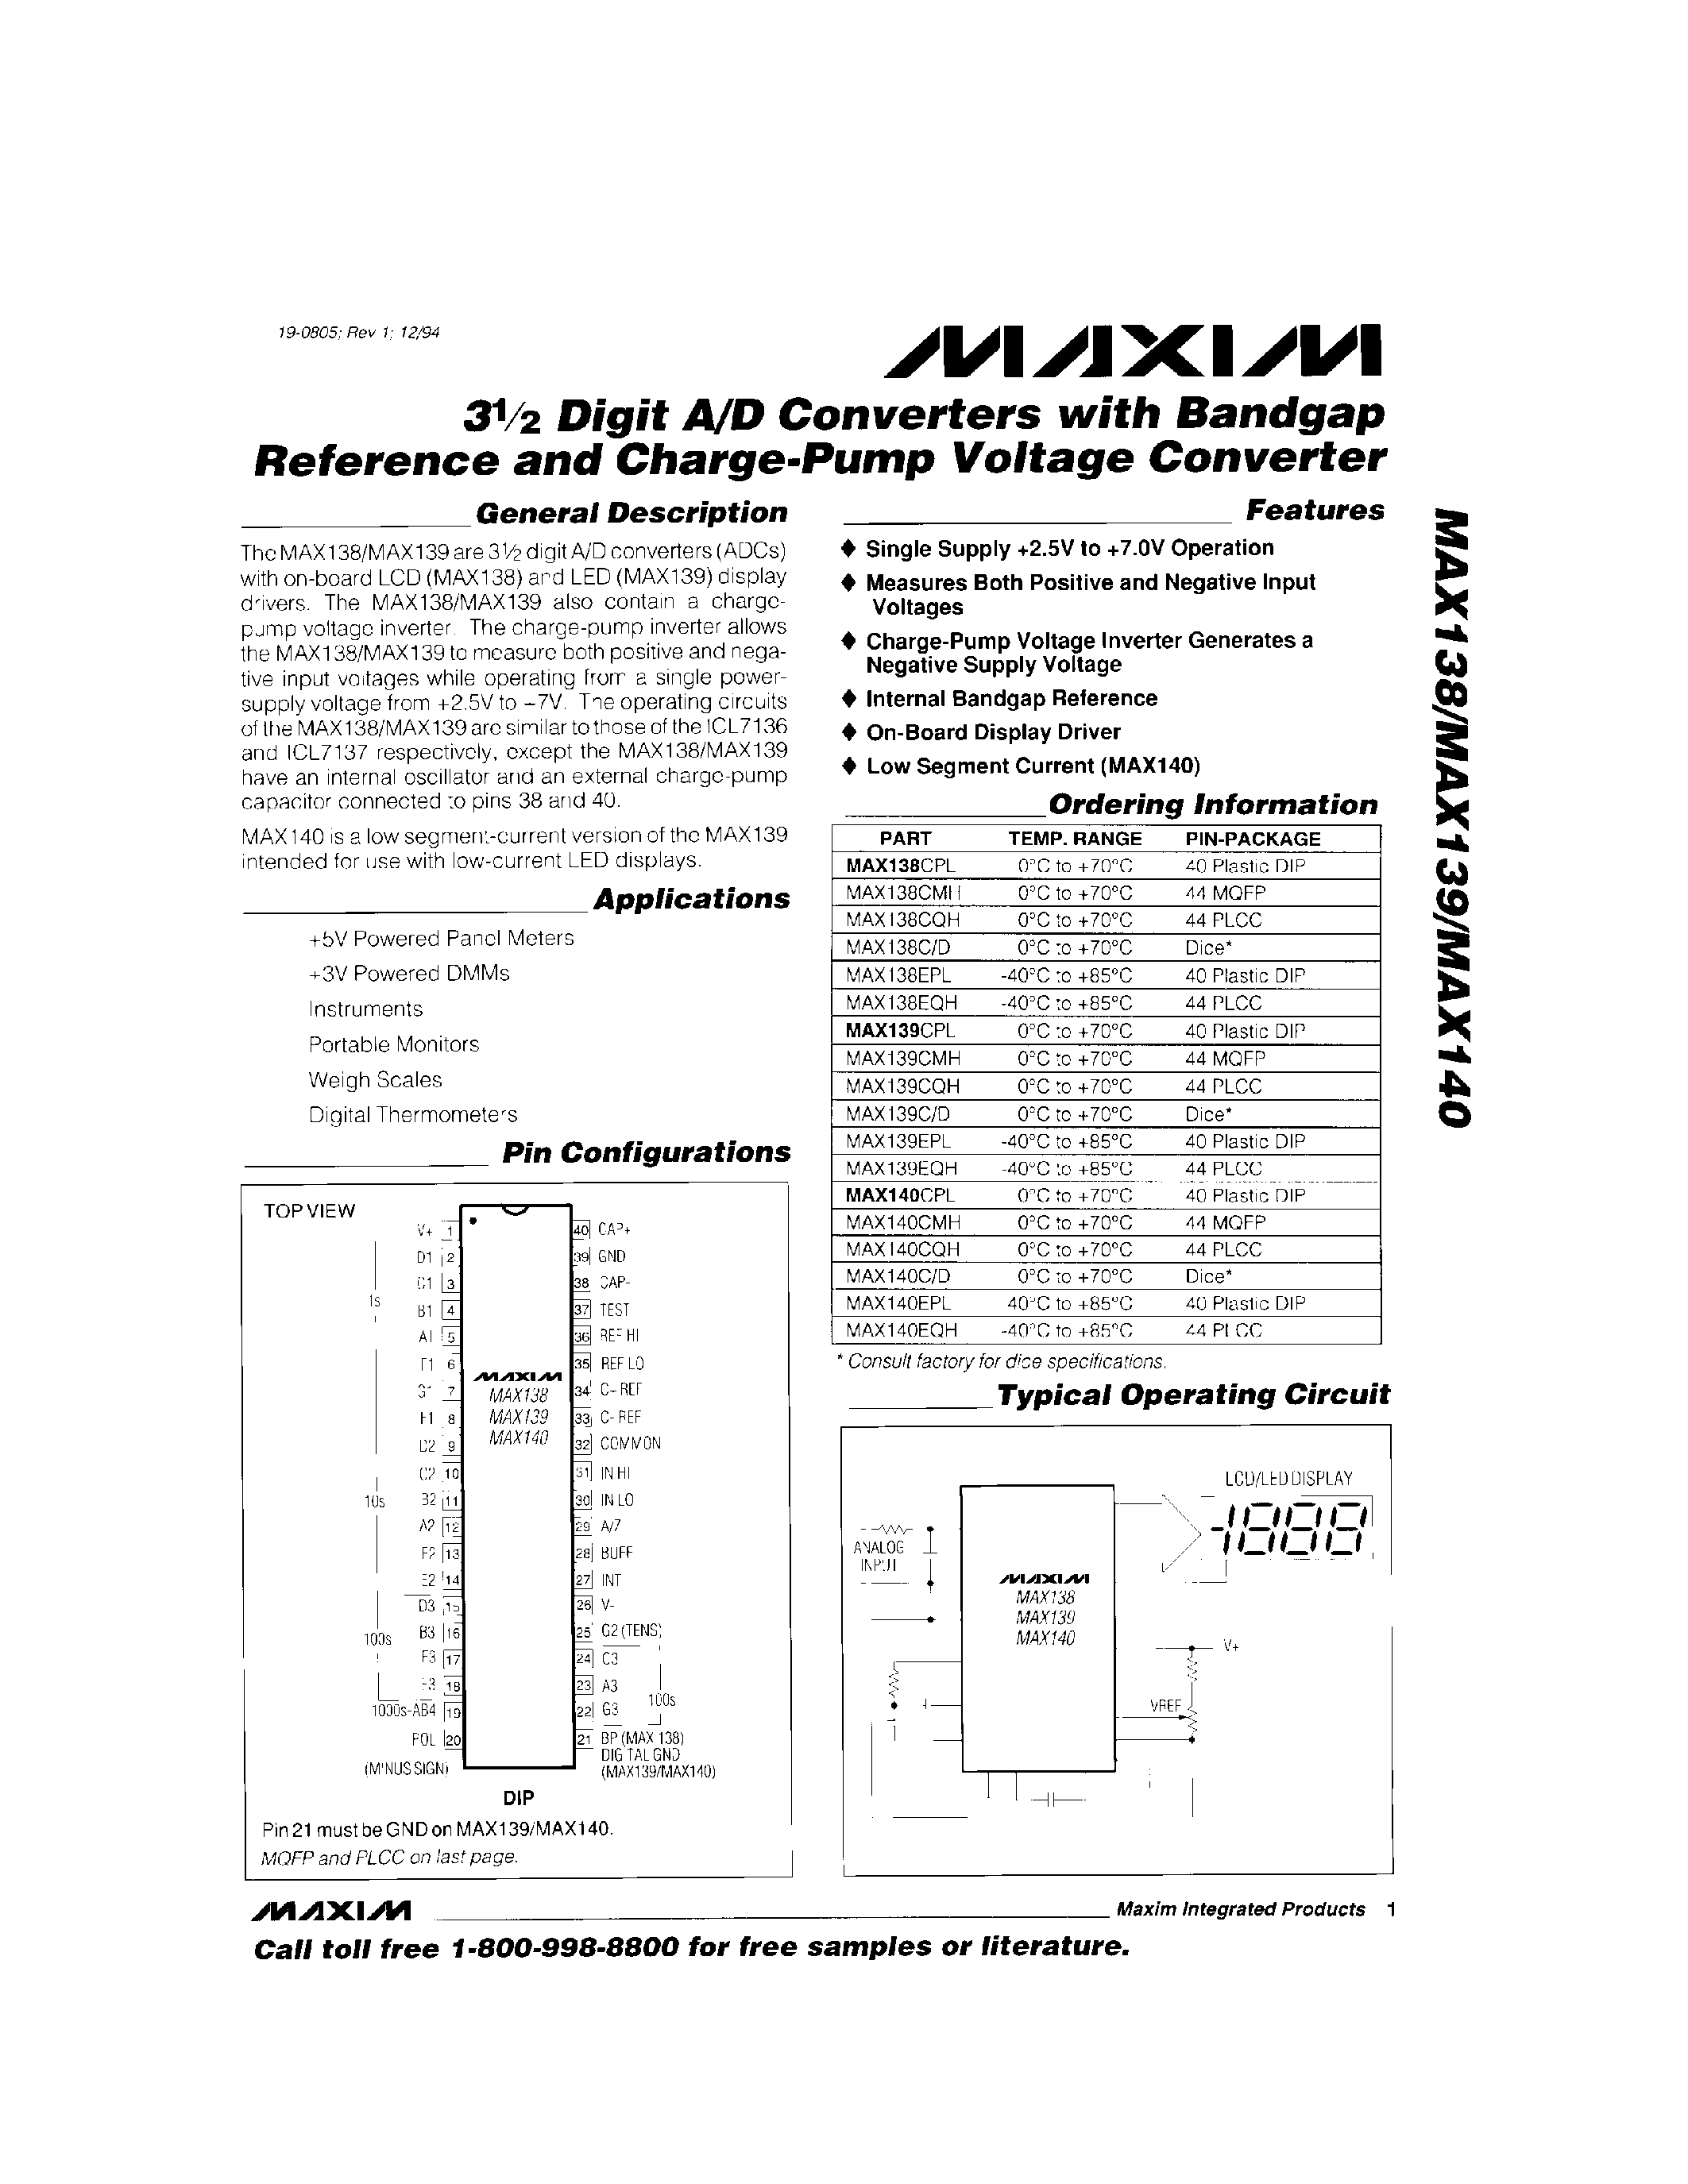 Даташит MAX140C/D - 3Digit A/D Converters with Bandgap Refrence and Charge-Pump Voltage Converter страница 1